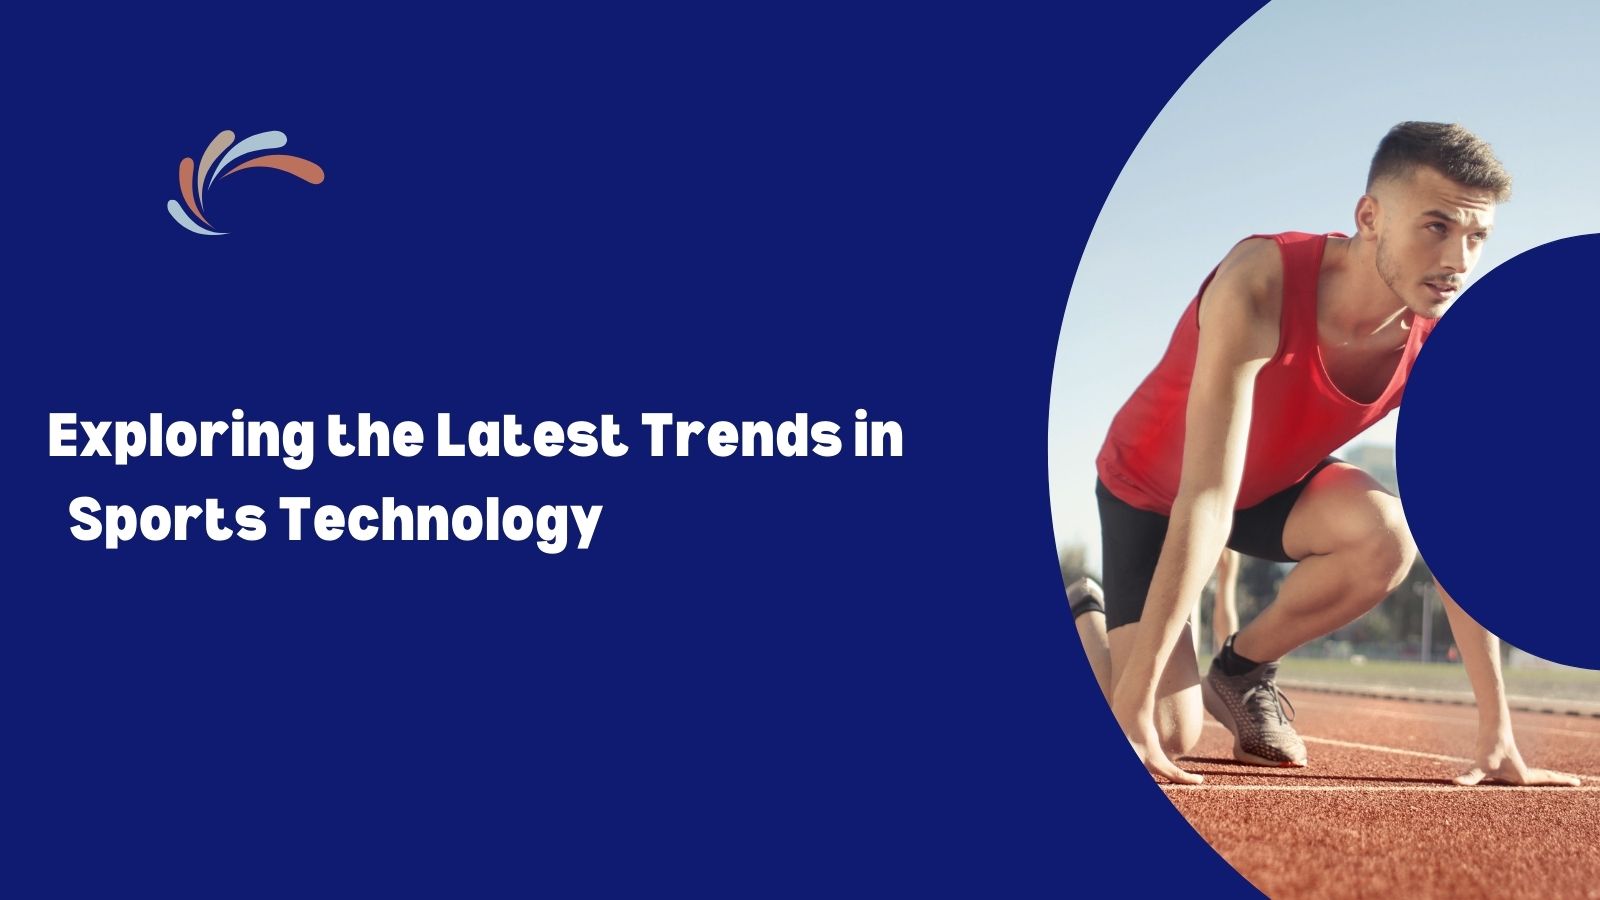 Exploring the latest trends in Sports Technology